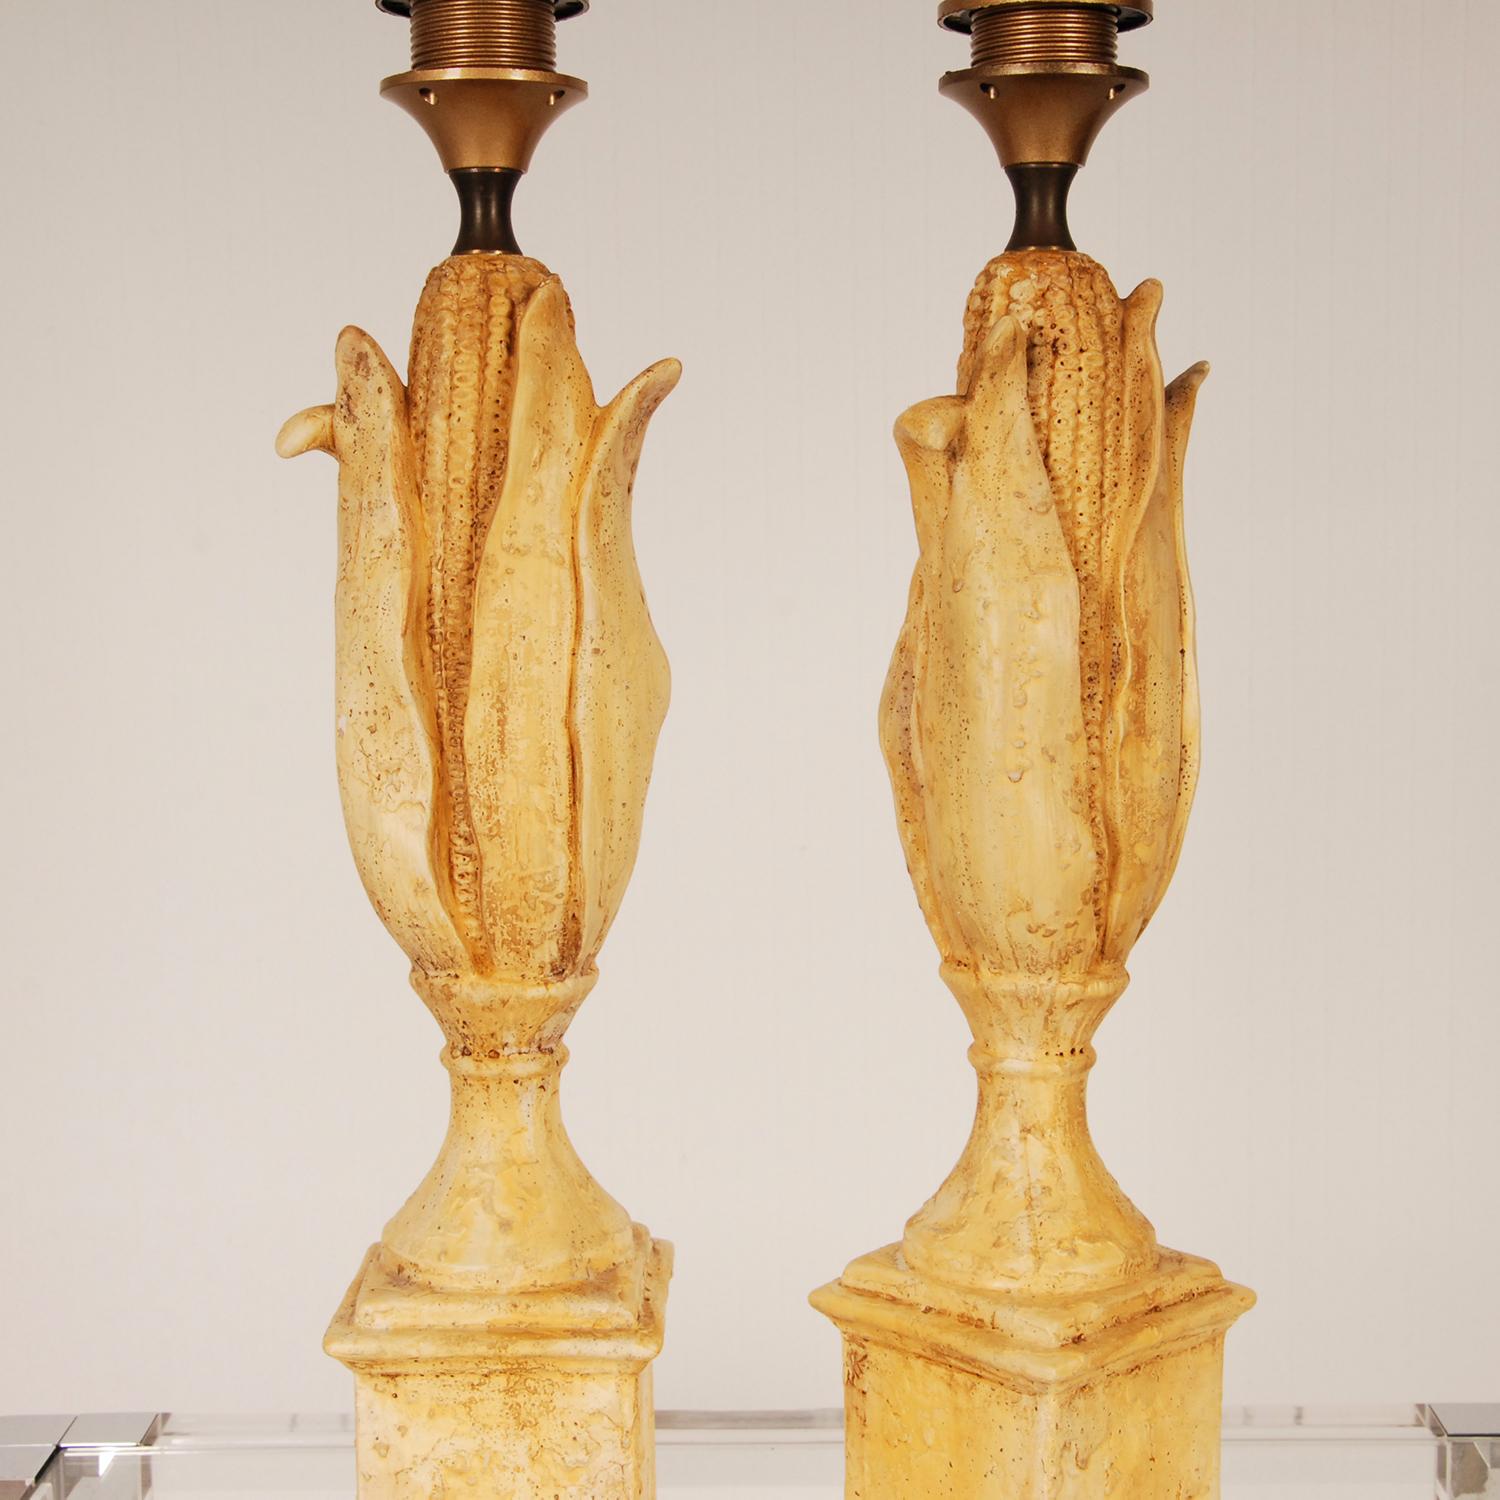 A pair vintage Italian figural table lamps
Depicting Corn
Material: Ceramic
Color: Sienna Yellow
Origin: Italy 1970s
Style Mid Century, Rustic, Country Style
Cord color Gold
Lamps E27 max 60W
US compatible but adapter for plug required
Condition